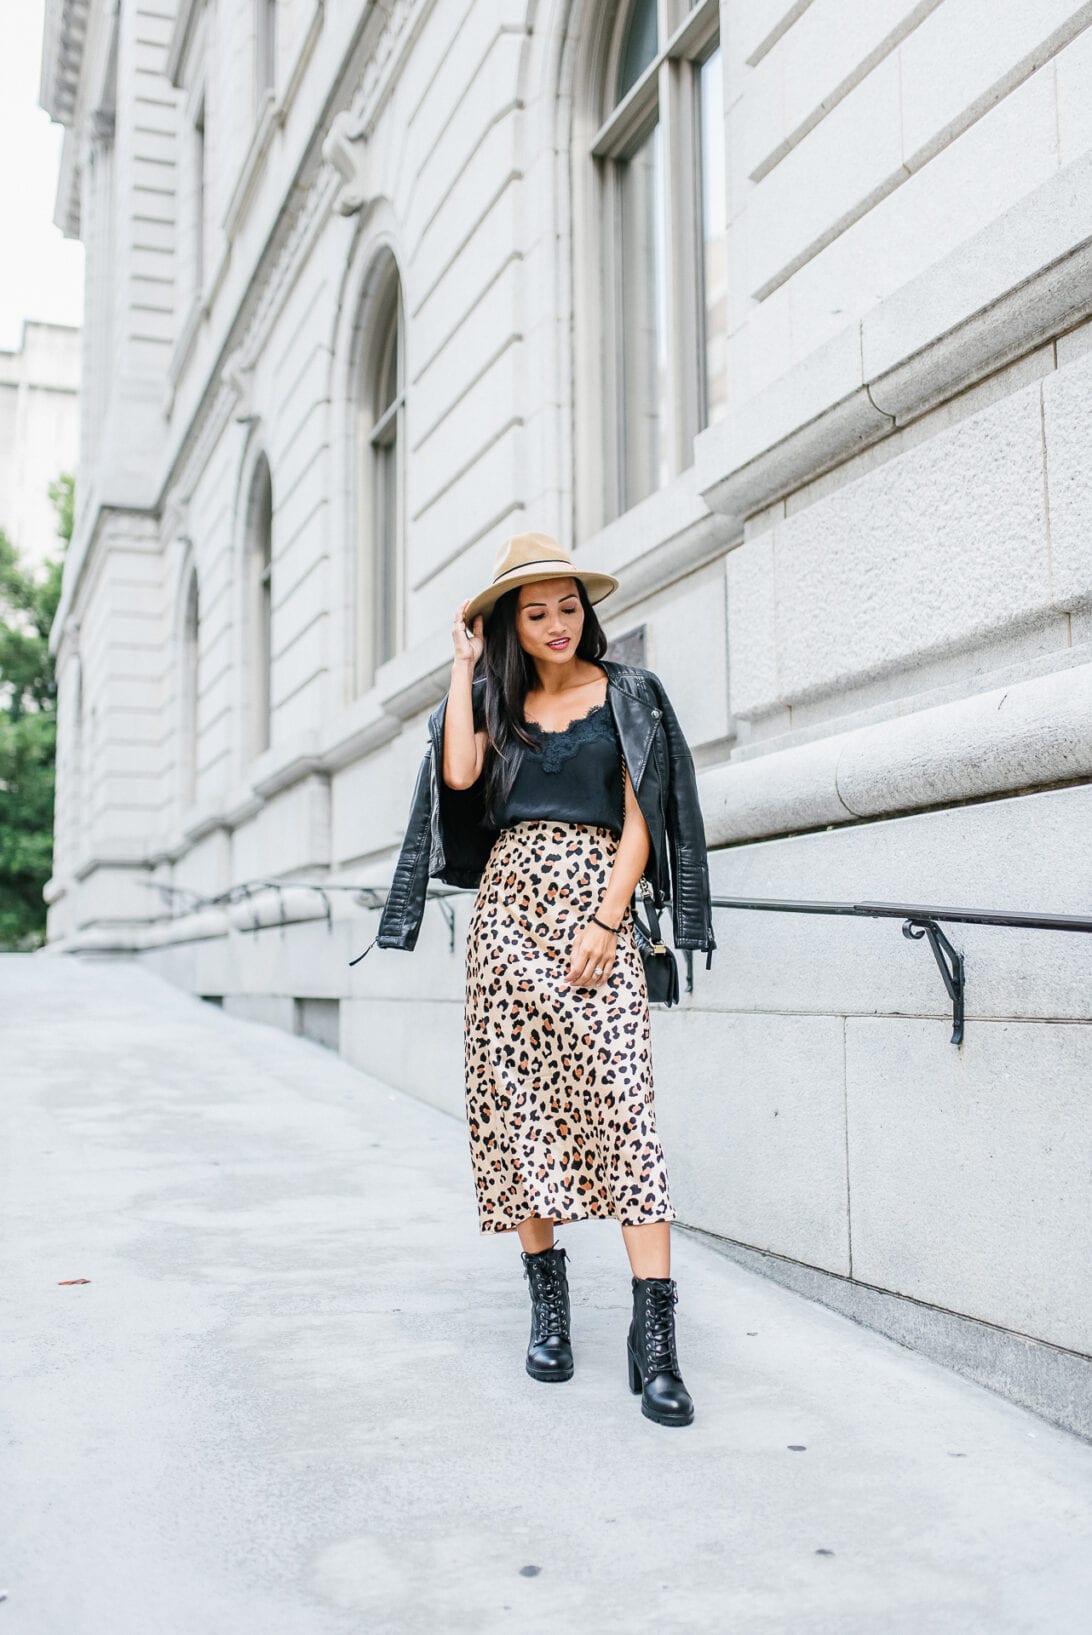 HOW TO WEAR LEOPARD SKIRT, BLACK LEATHER JACKET, FALL OUTFIT